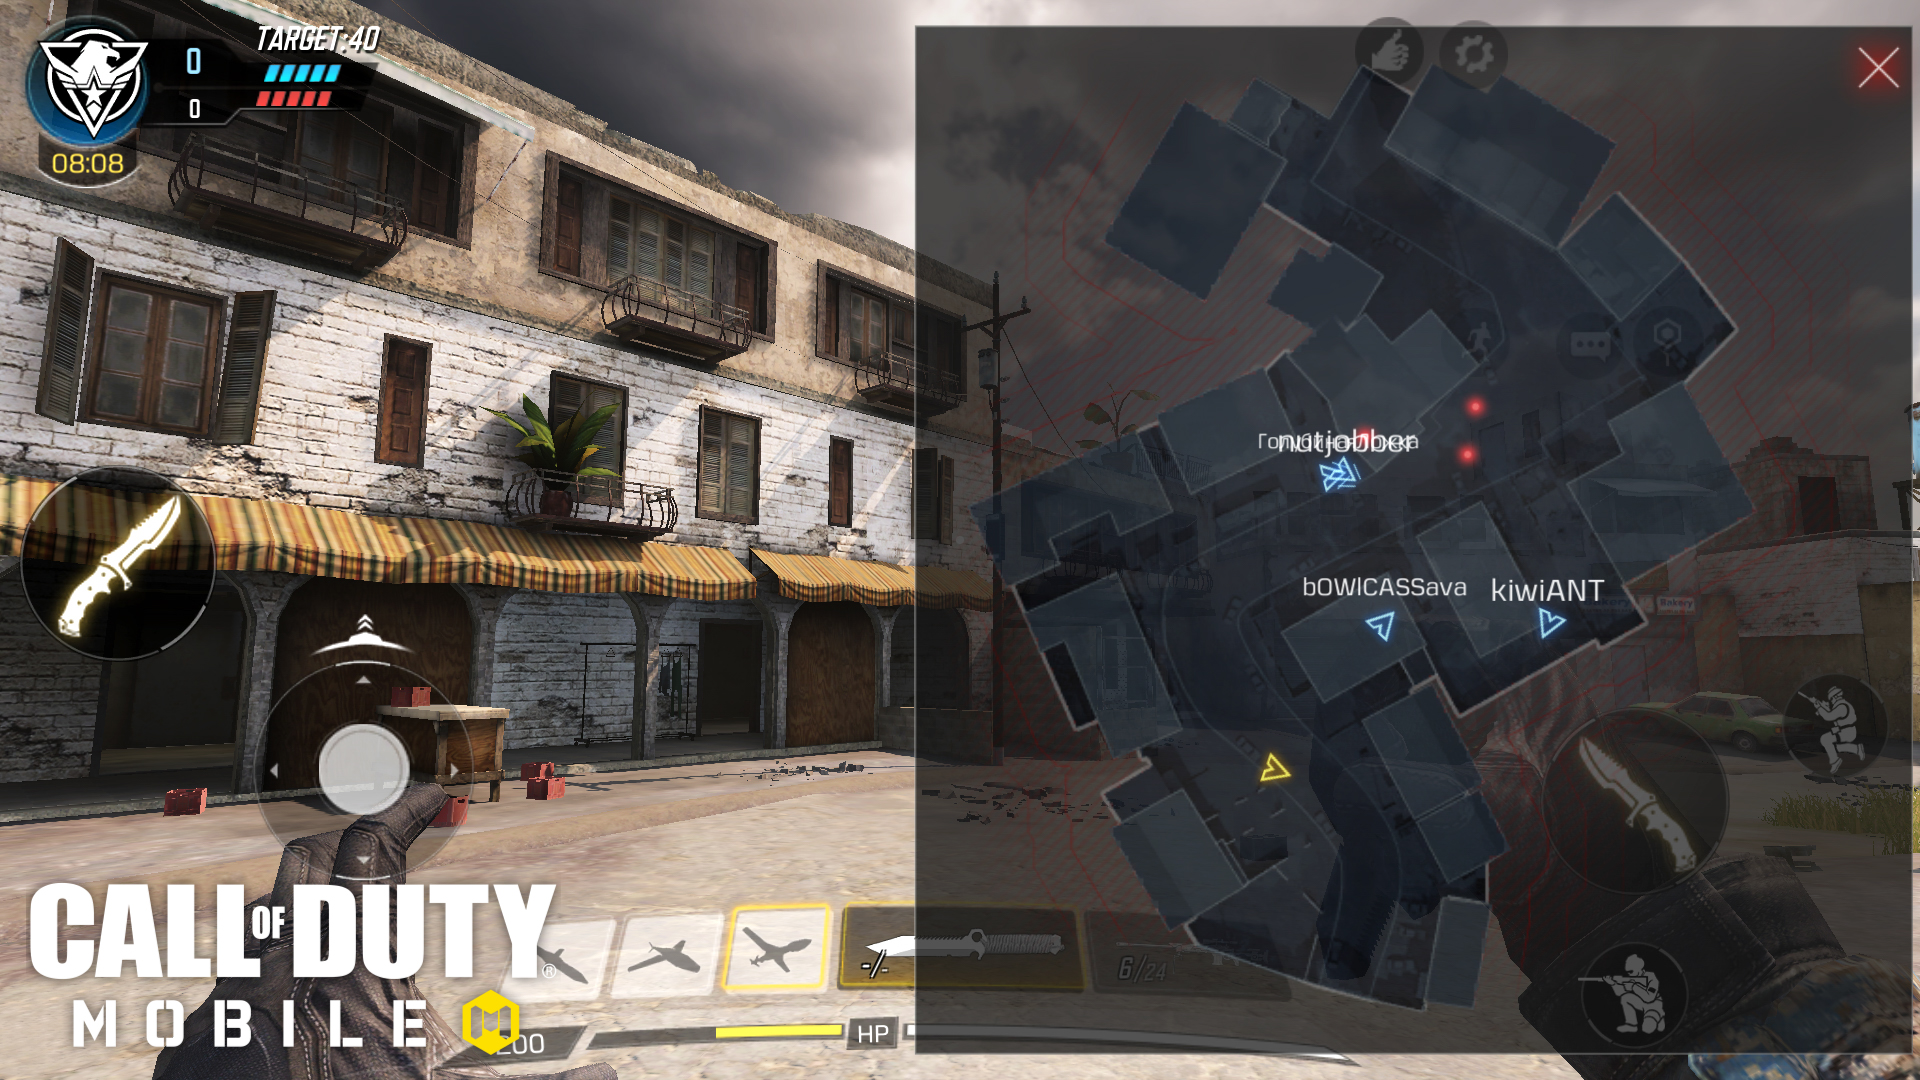 Everything we know about Call of Duty: Mobile – Maps, Modes, and